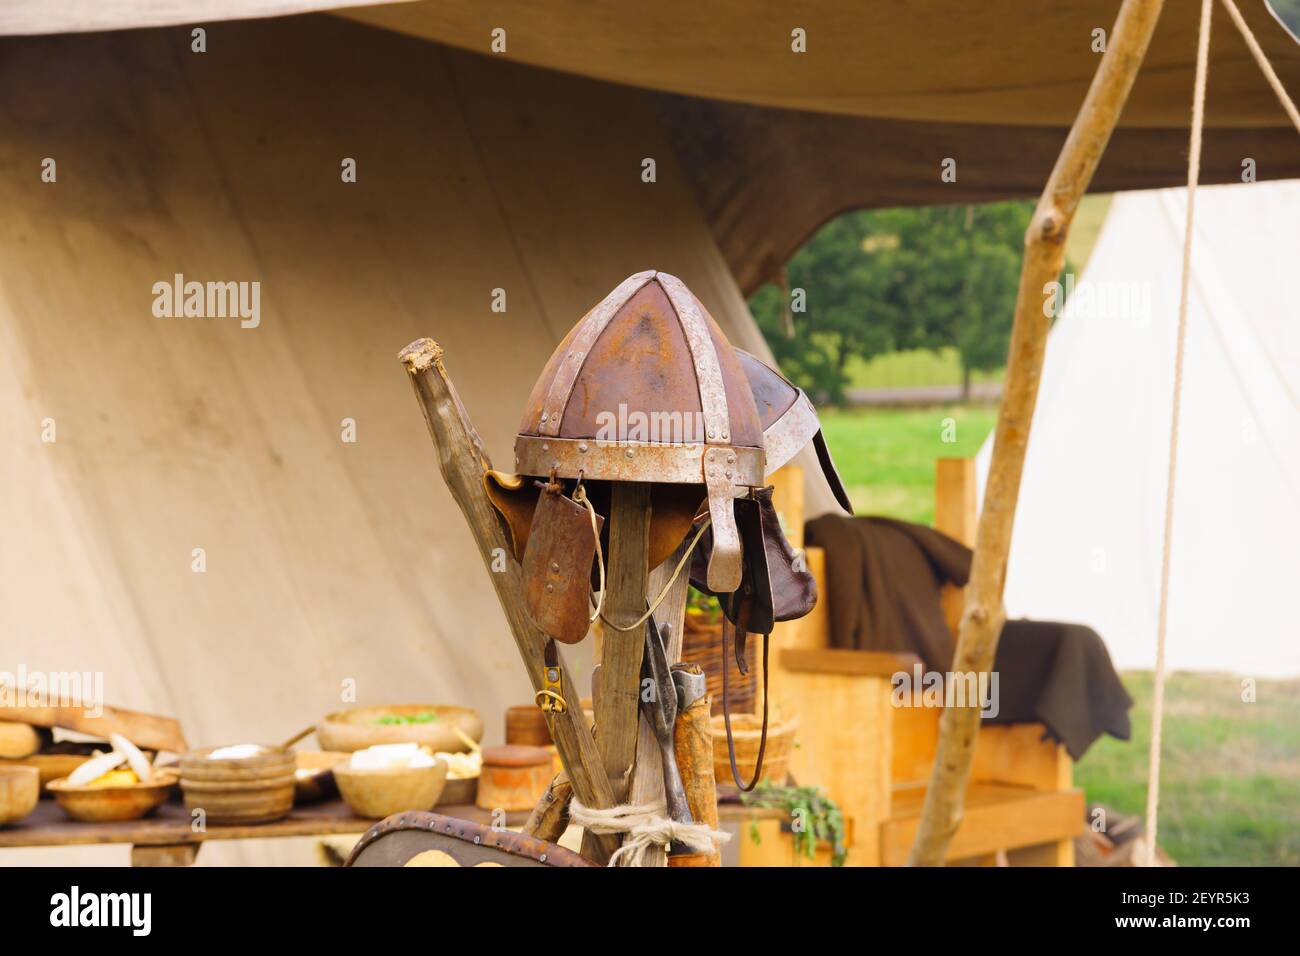 Early medieval spangenhelm or leather skull cap with metal reinforcements in a re-enactment camp Stock Photo